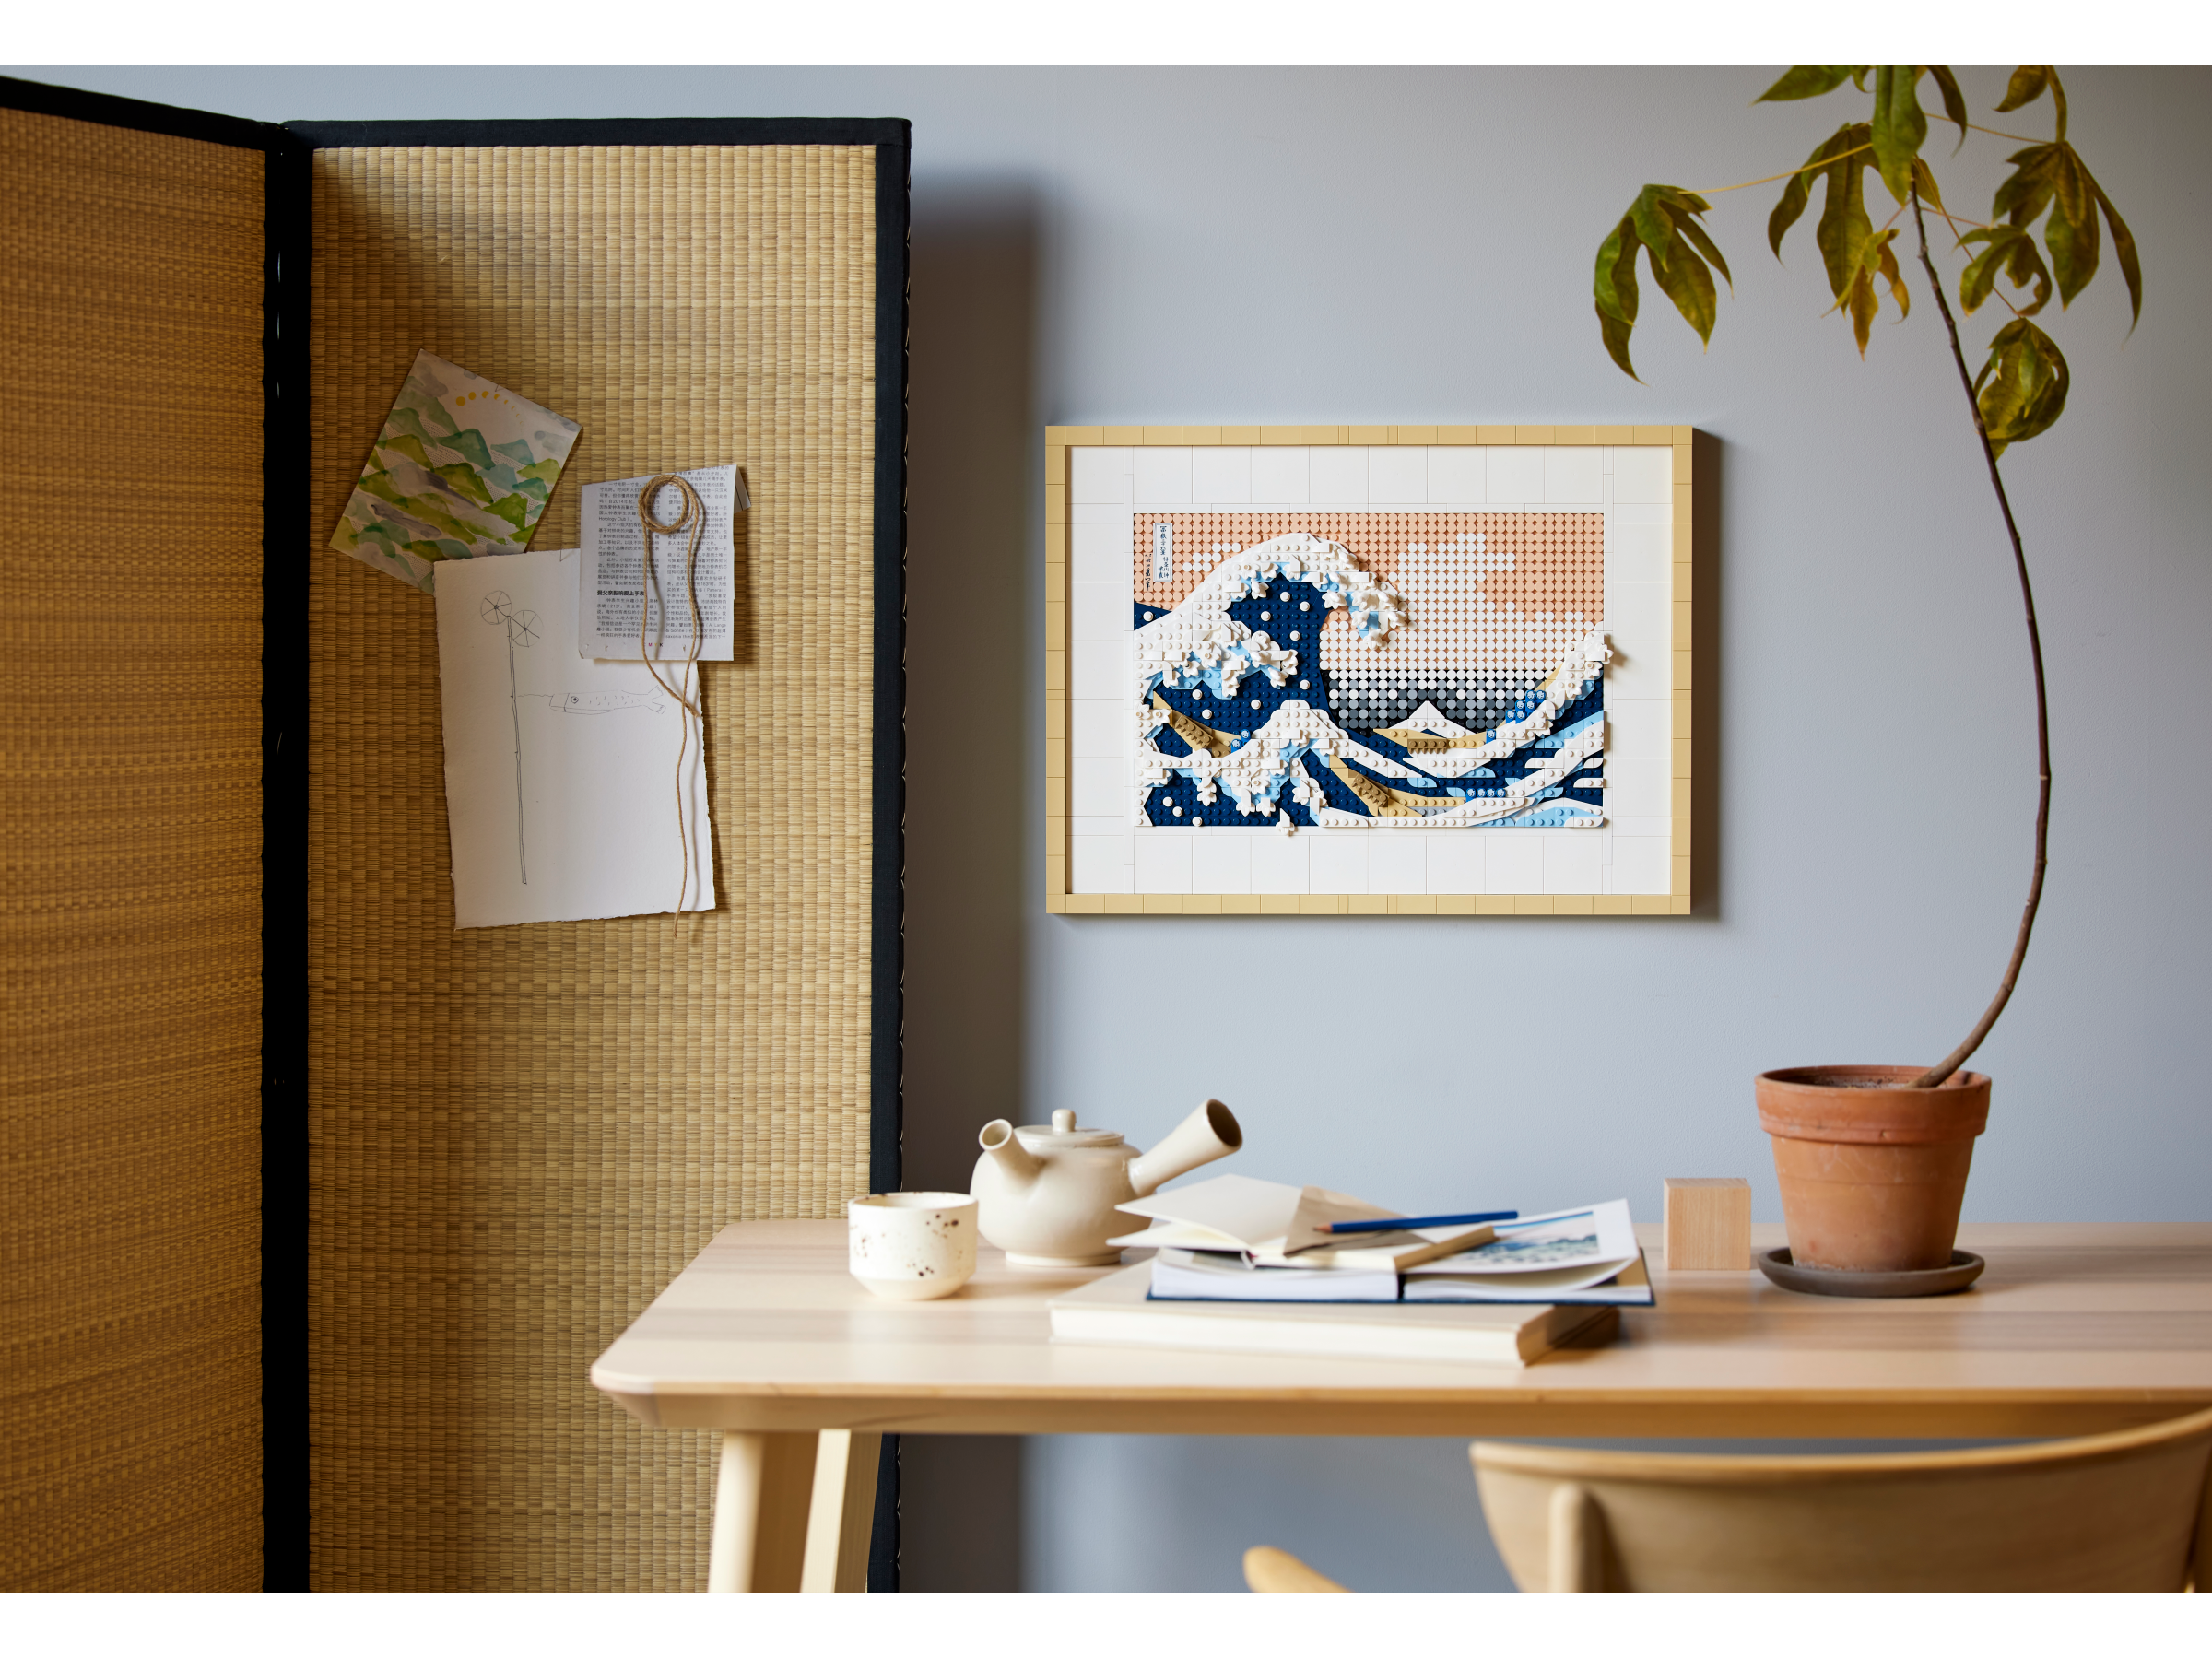  LEGO Art Hokusai – The Great Wave 31208, 3D Japanese Wall Art,  Framed Ocean Canvas Picture for Home or Office Décor, Creative DIY  Activity, Arts & Crafts Kit, Hobbies for Adults 